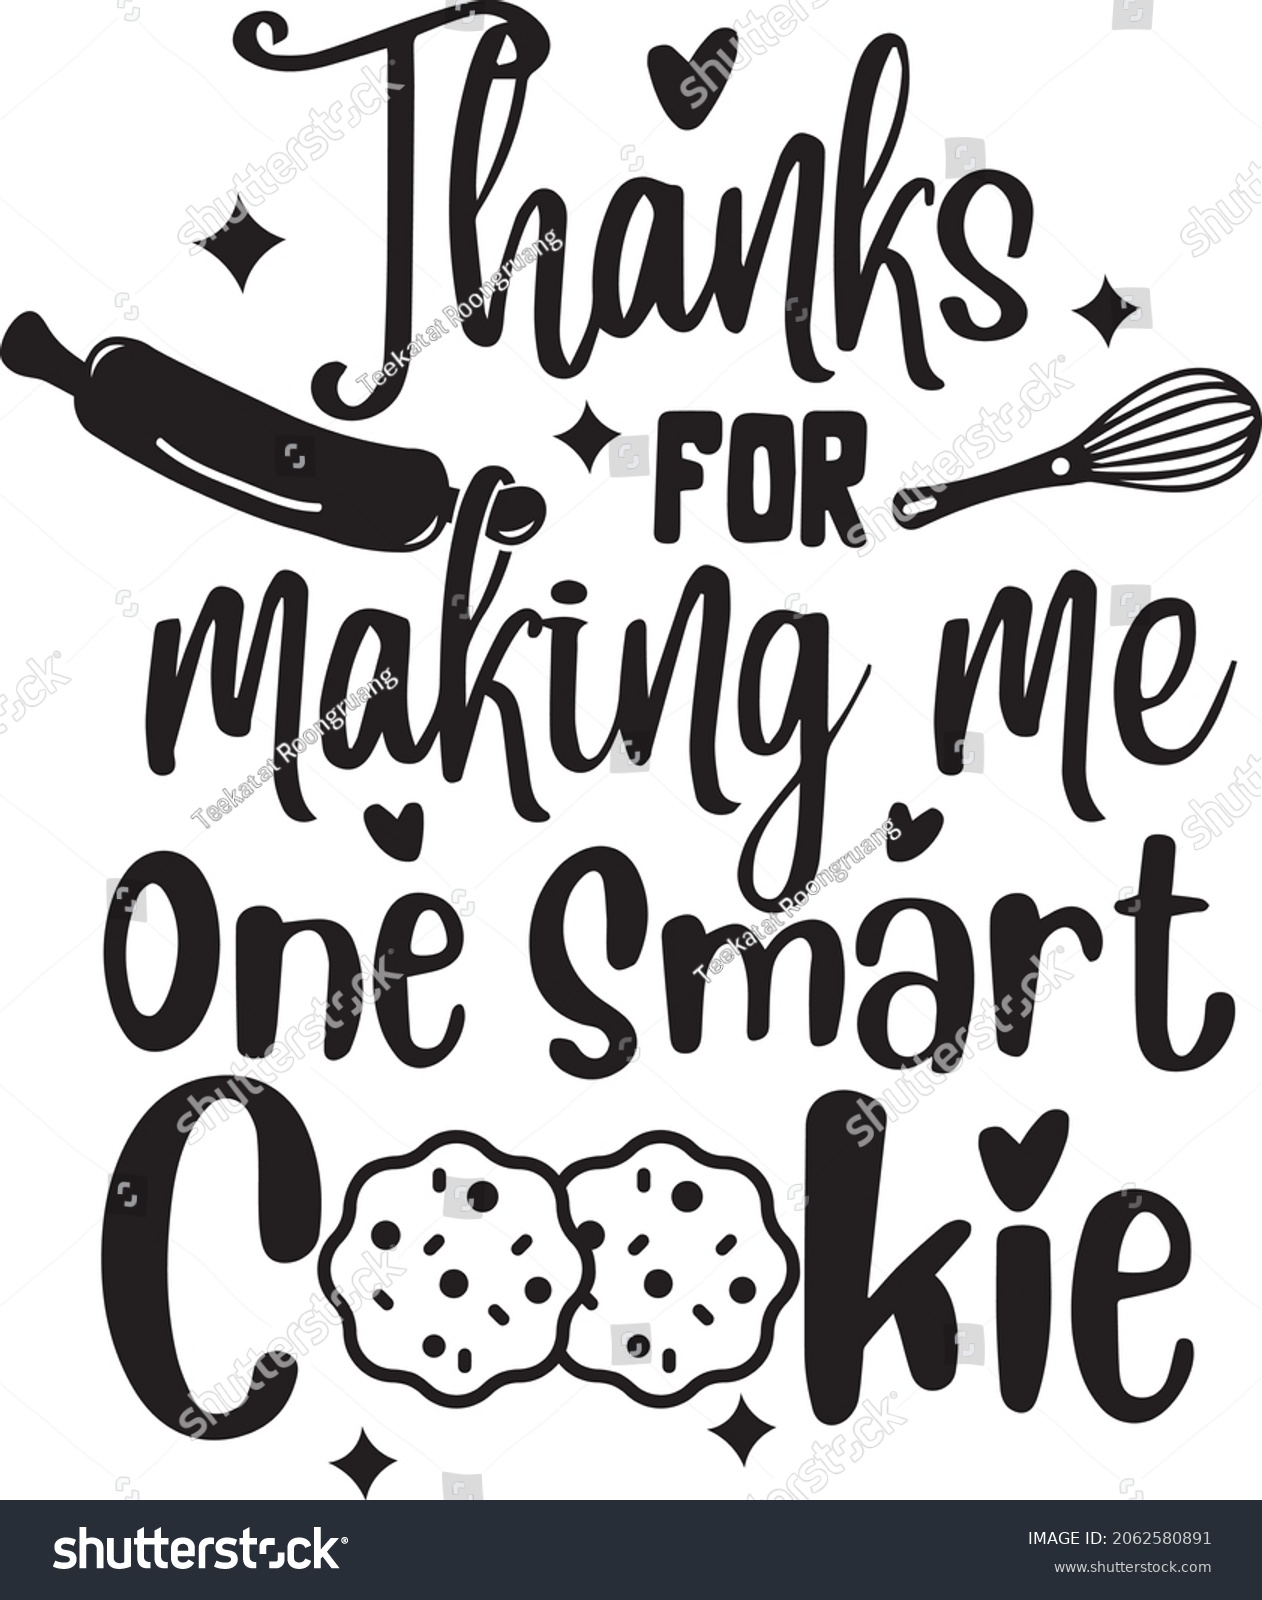 SVG of Thanks for making me one smart cookie, lettering design, Funny Kitchen Quotes, Christmas Baking, banner lettering. Illustration for prints on t-shirts and bags, potholder, cards. Christmas phrase.  svg